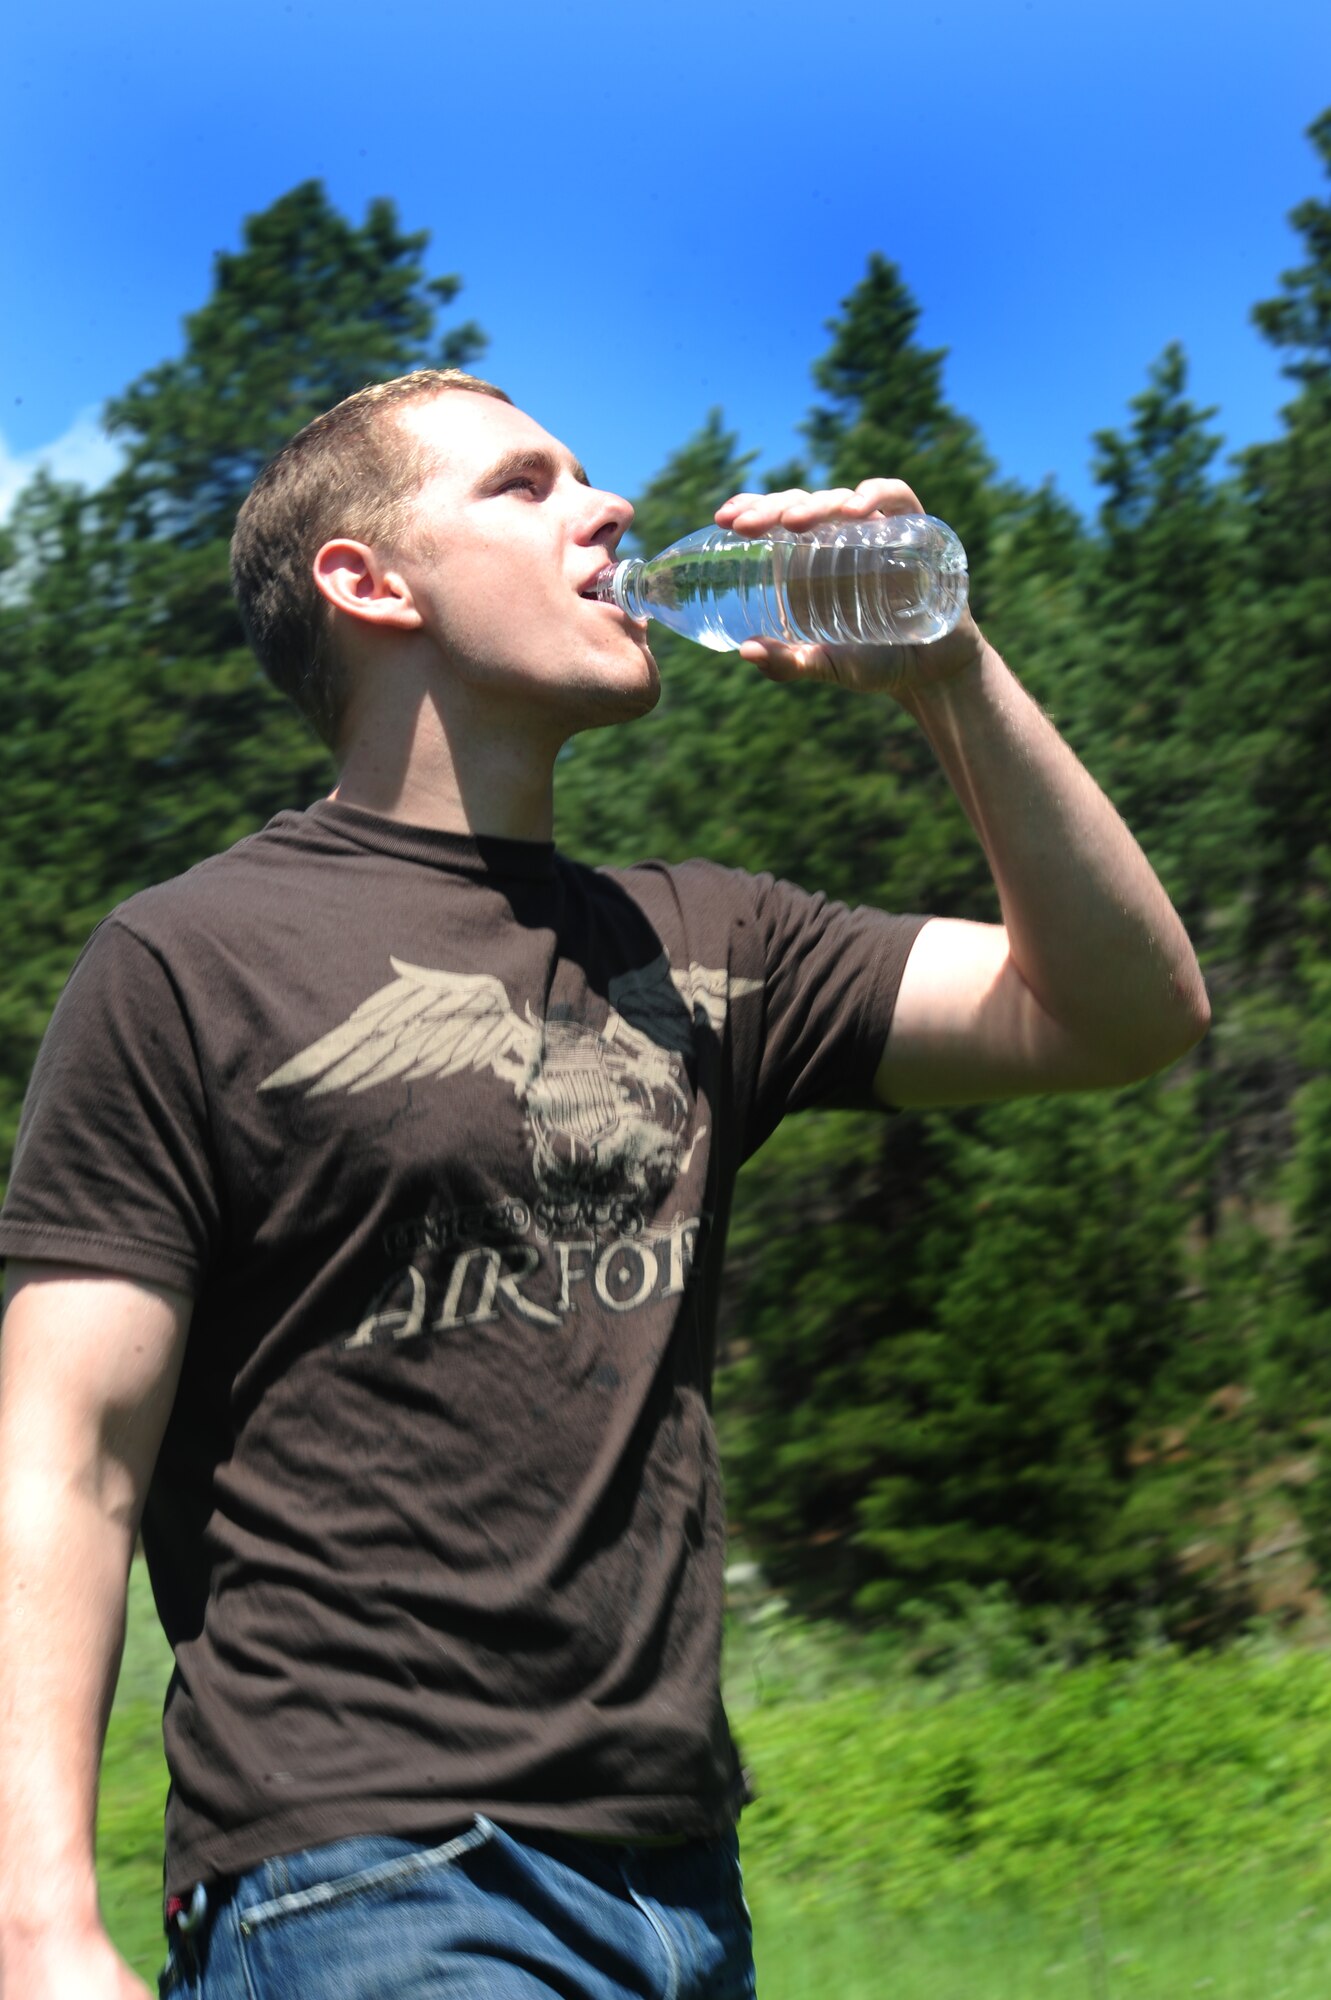 ELLSWORTH AIR FORCE BASE, S.D. -- Airman 1st Class Mitchell Carrell, 28th Civil Engineer Squadron firefighter, drinks water after hiking in the sun to keep hydrated at Rapid Creek Trail Head, Rapid City, S.D., June 16.  It’s important to drink water while doing activities in the sun to keep the body from overheating. (U.S. Air Force photo/Airman 1st Class Anthony Sanchelli)
